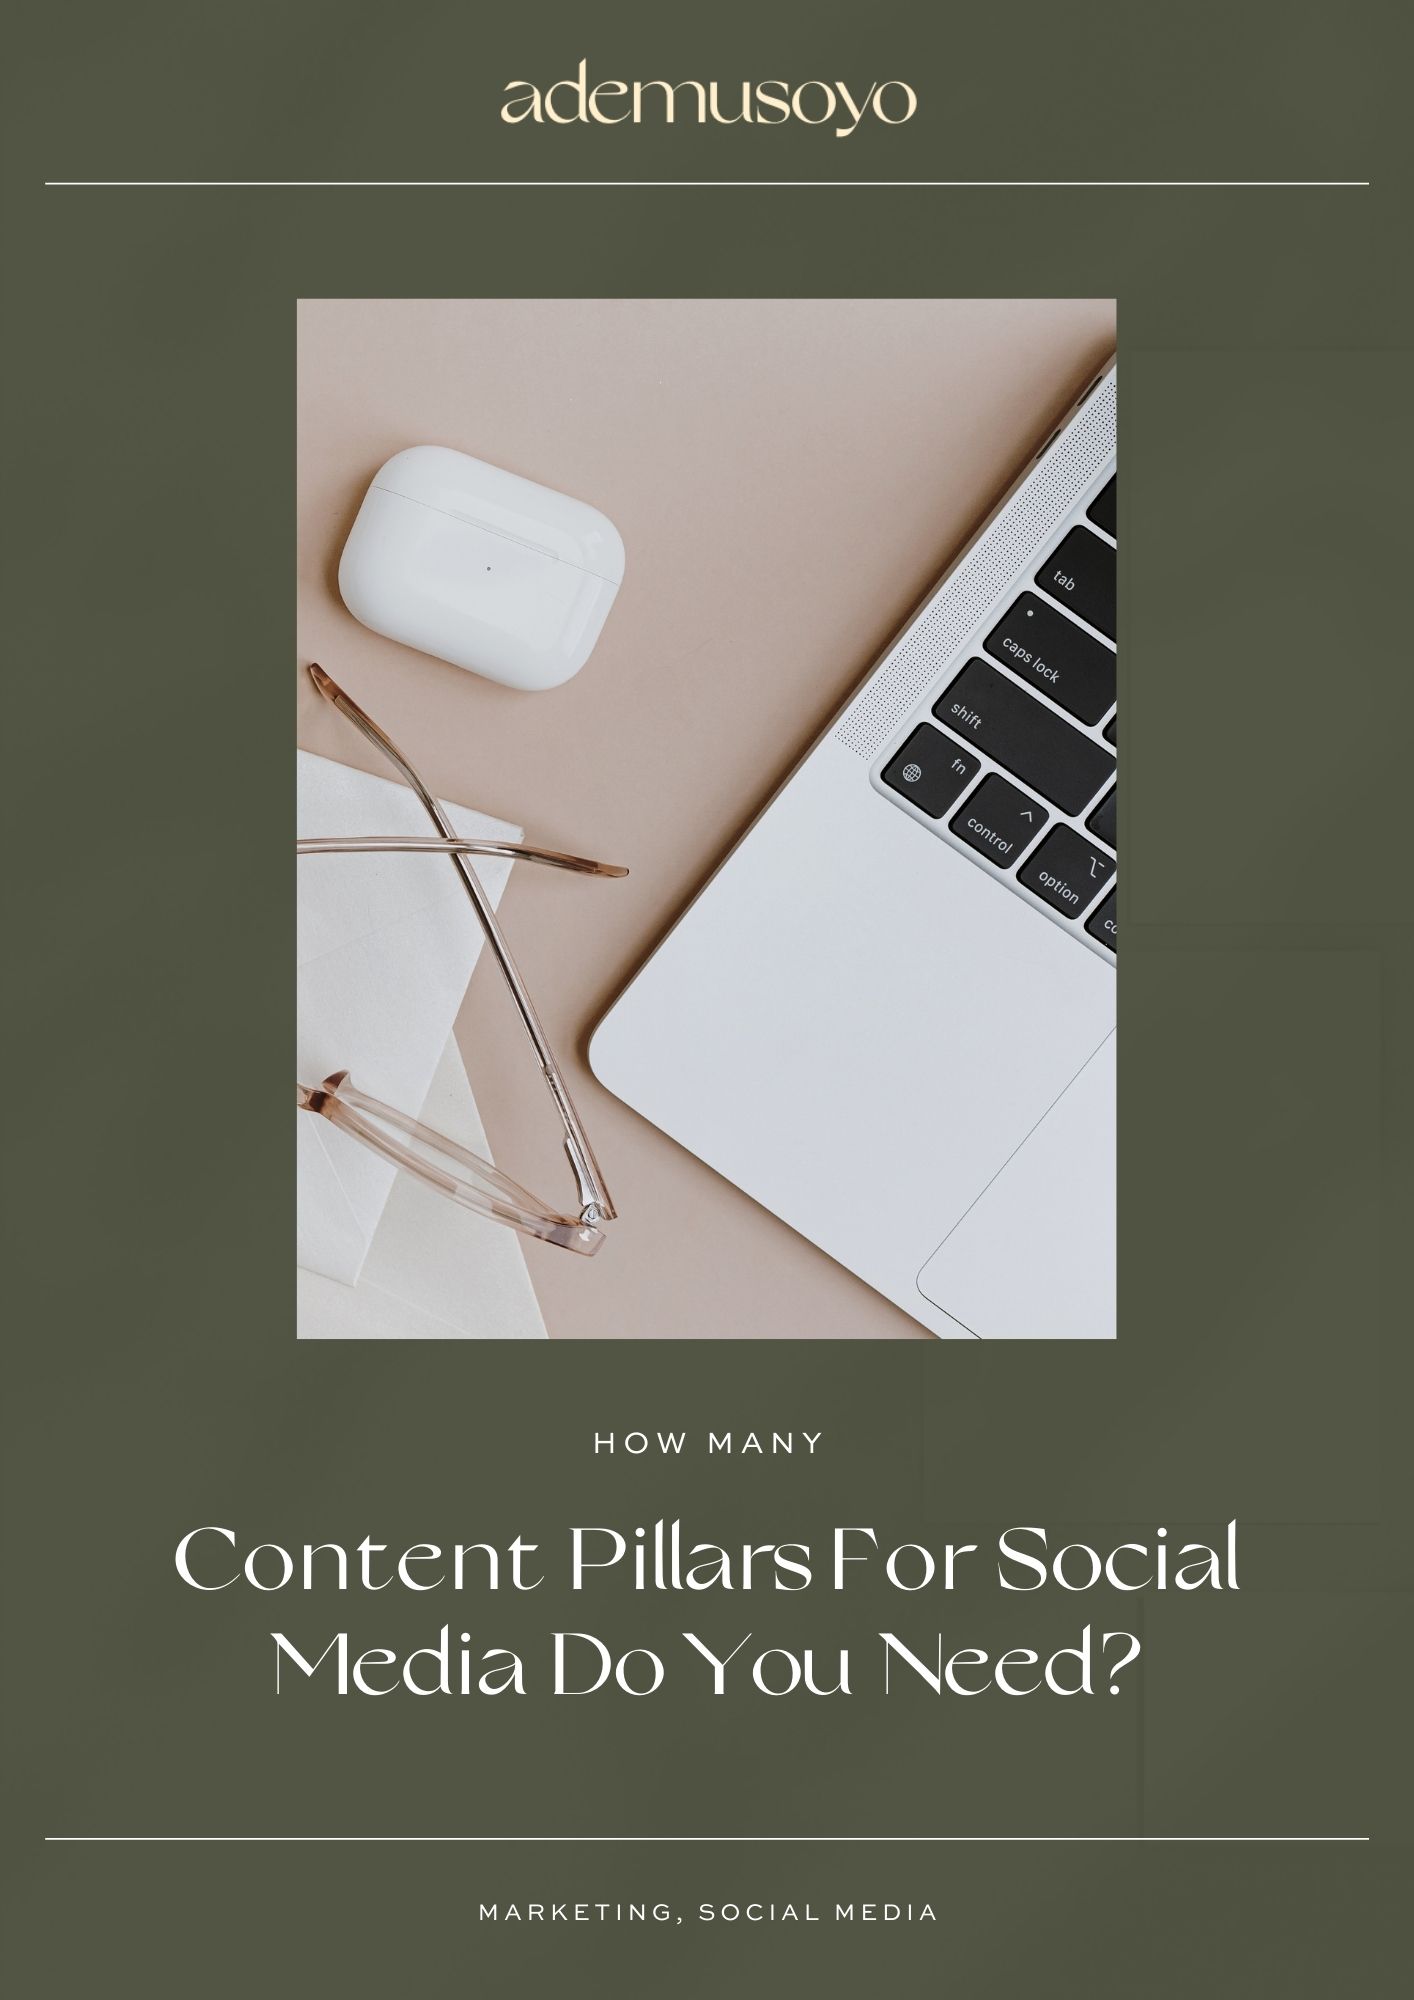 How Many Content Pillars For Social Media Do You Need?